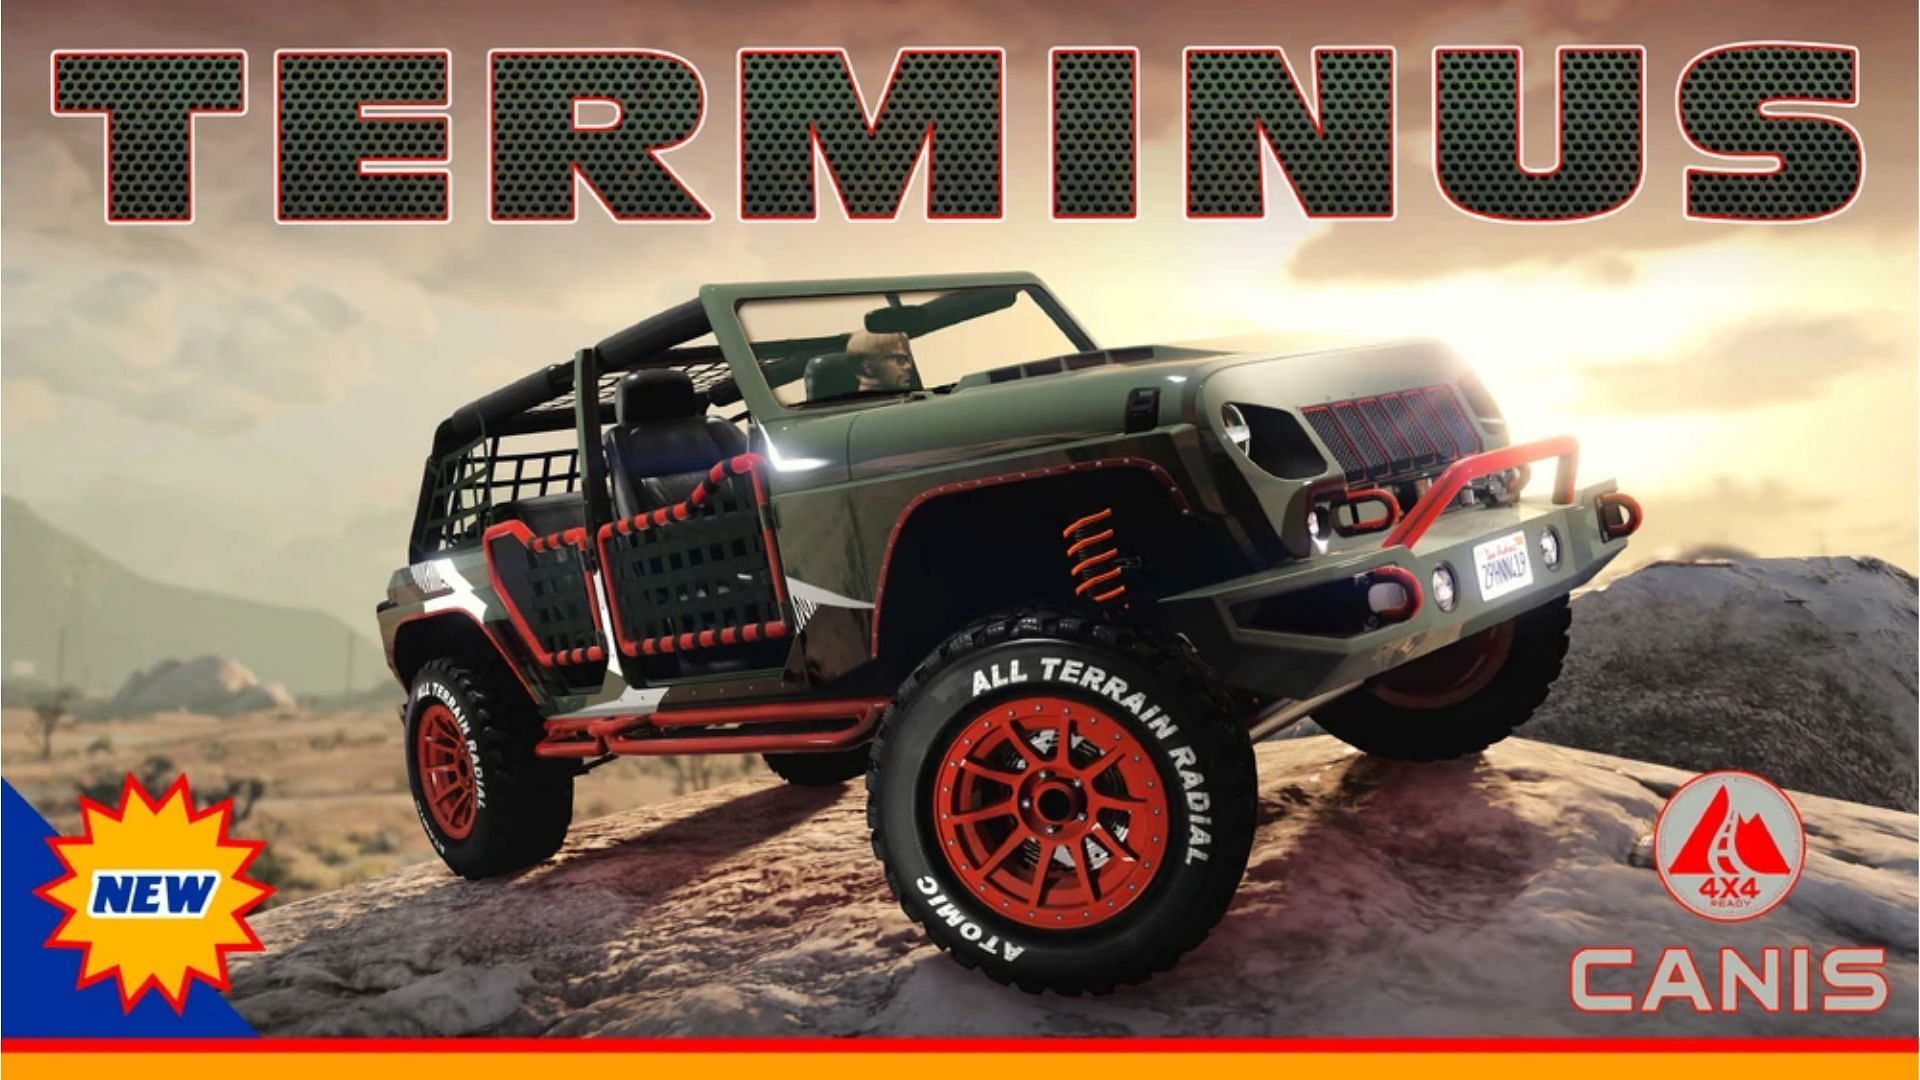 The official poster for the Canis Terminus in Grand Theft Auto Online (Image via Rockstar Games)